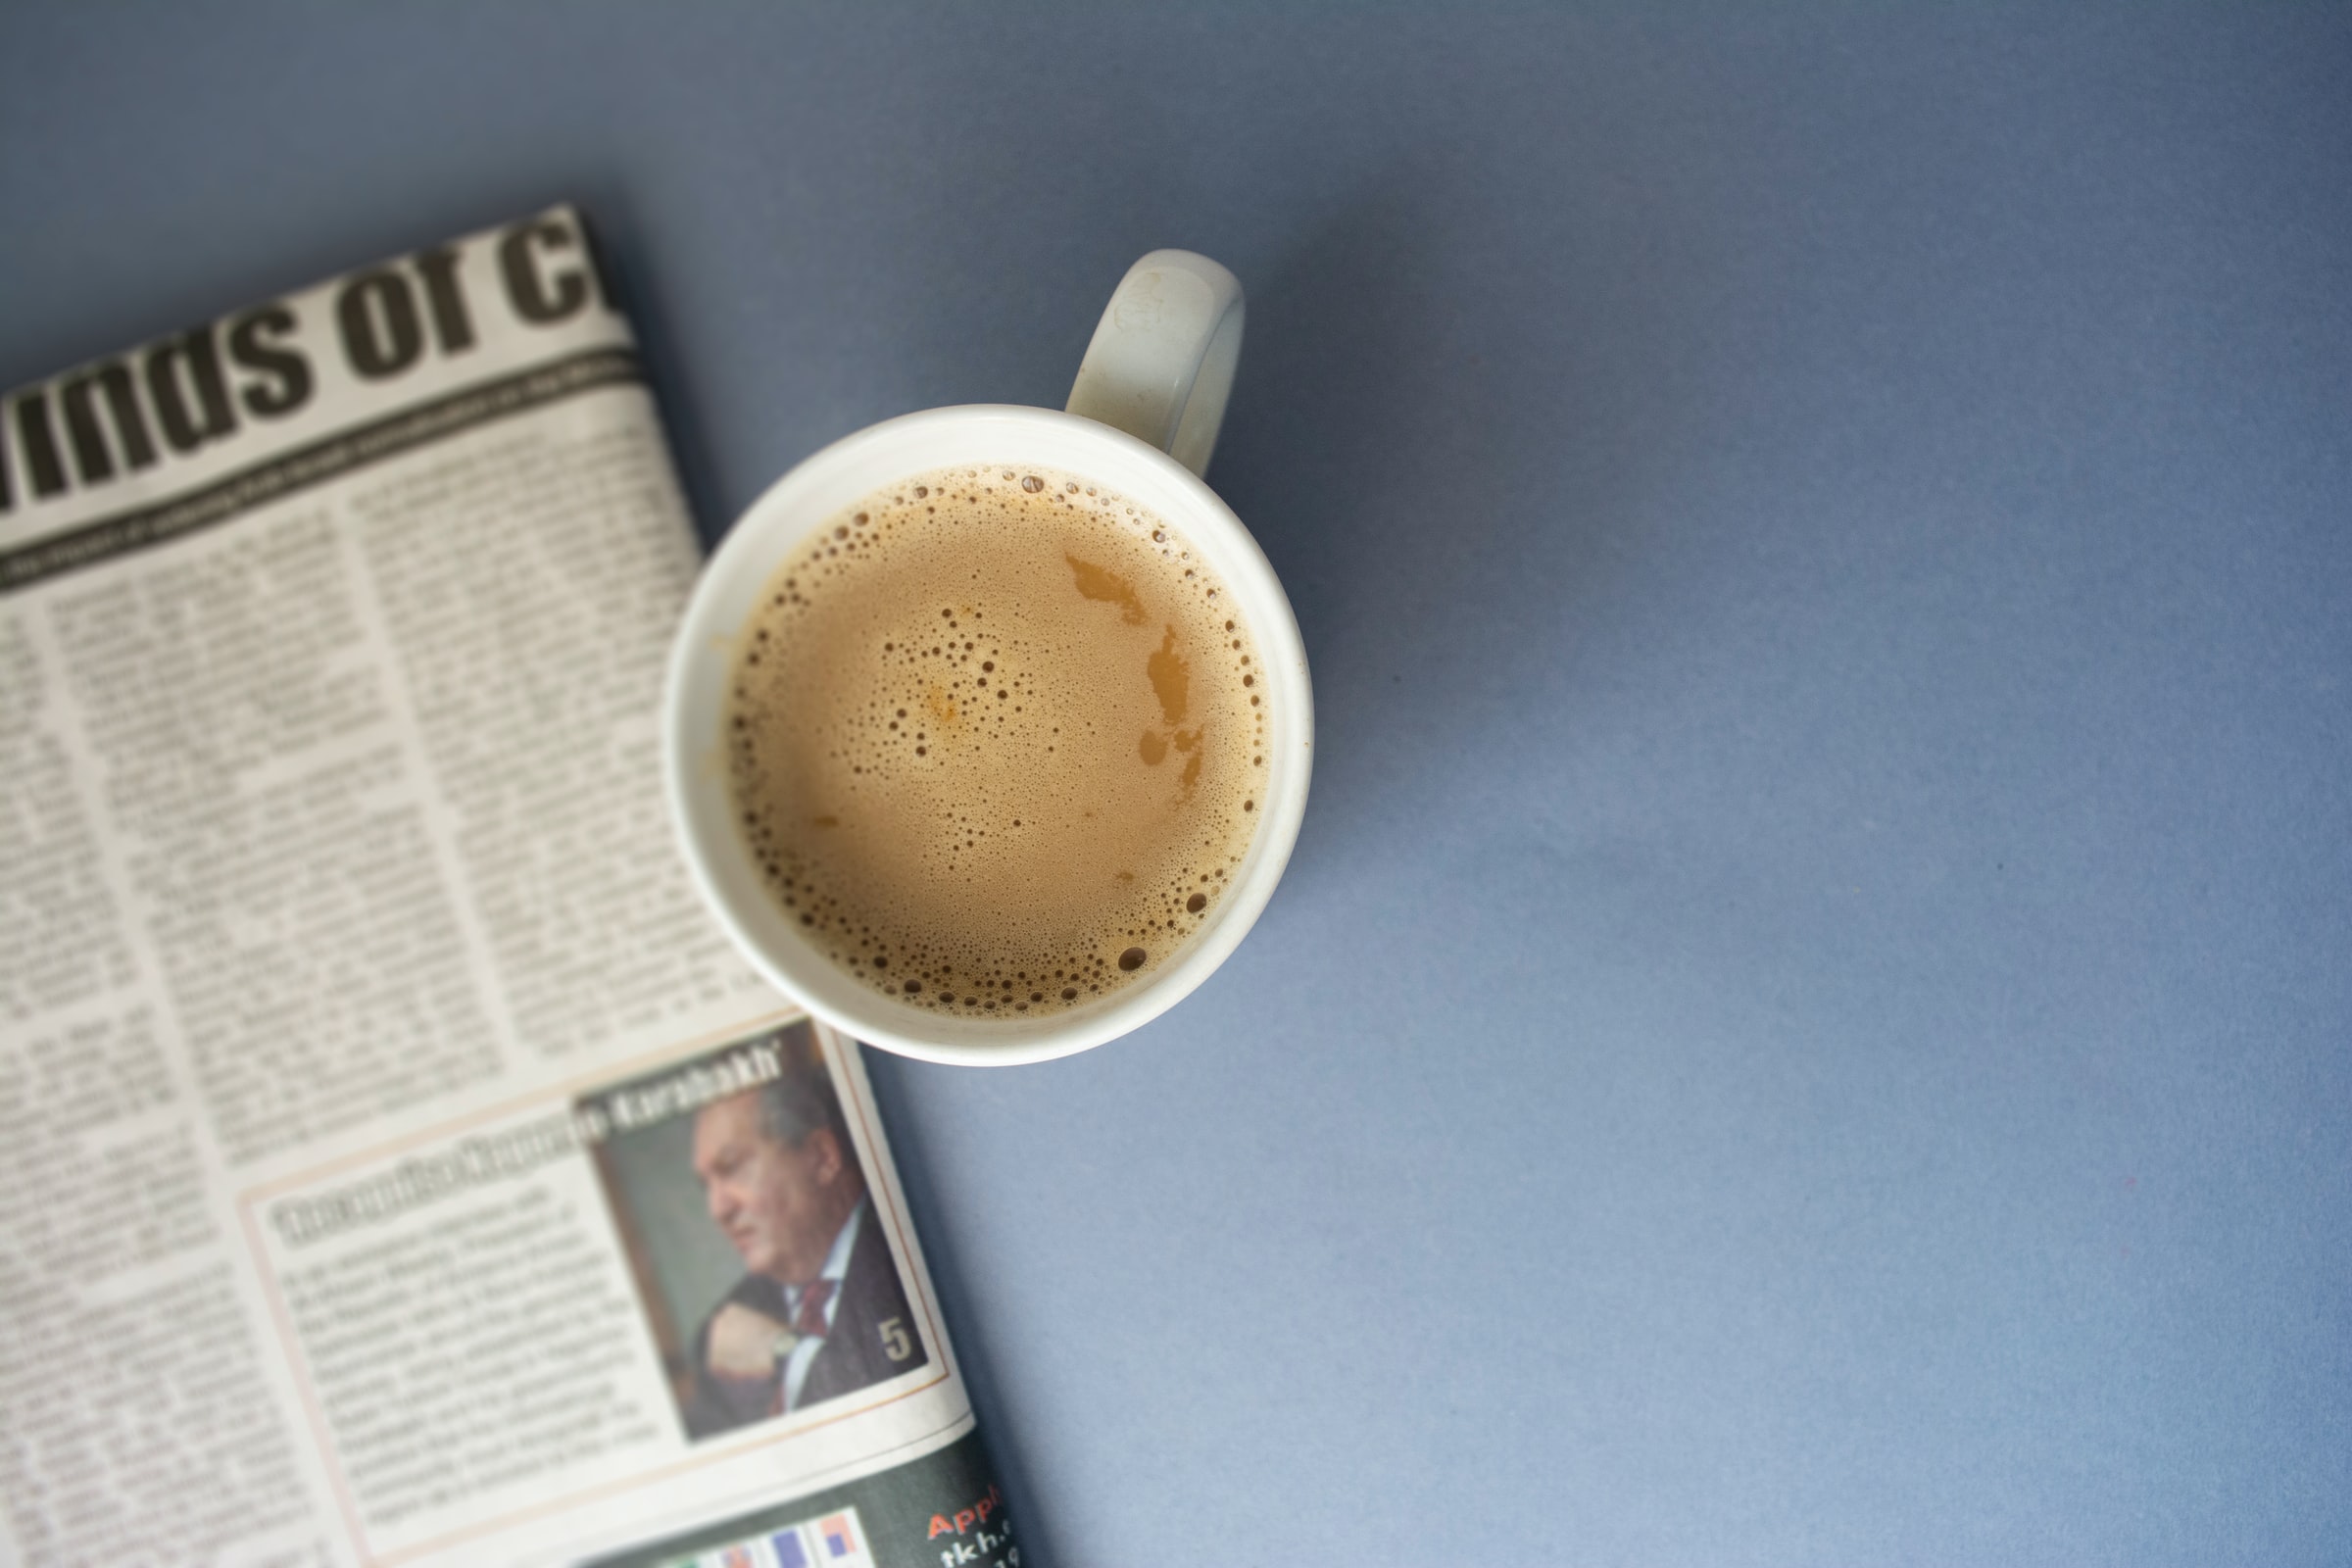 A cup of coffee and a daily newspaper